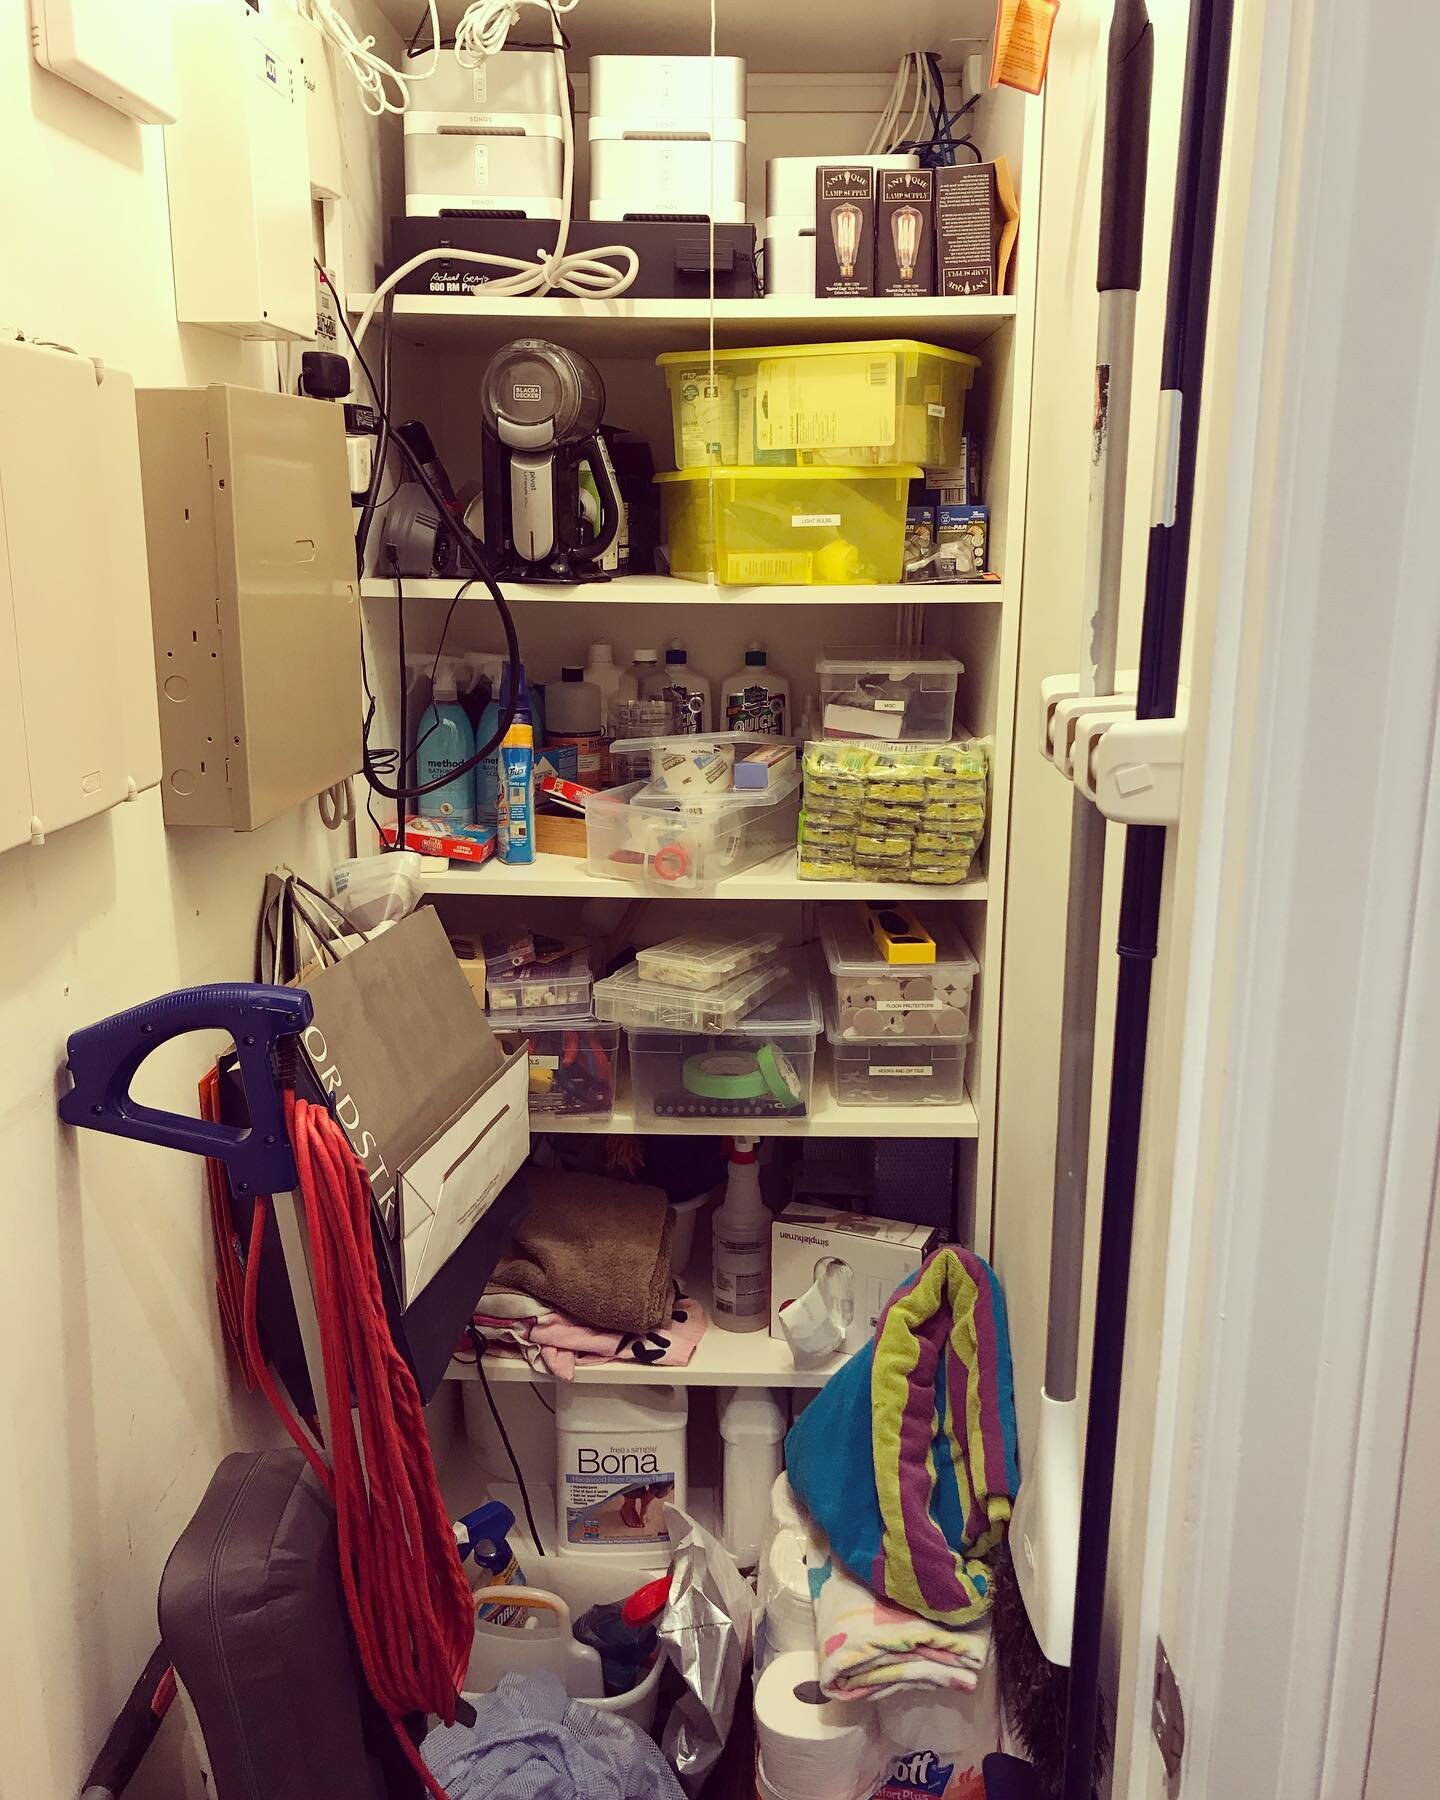 This hallway closet was becoming a little overrun with cleaning supplies, light bulbs, tools &amp; towels. 
What to do? Empty the entire space (pic 2) and start fresh. Seeing the empty shelves provides clarity and the motivation to put everything bac